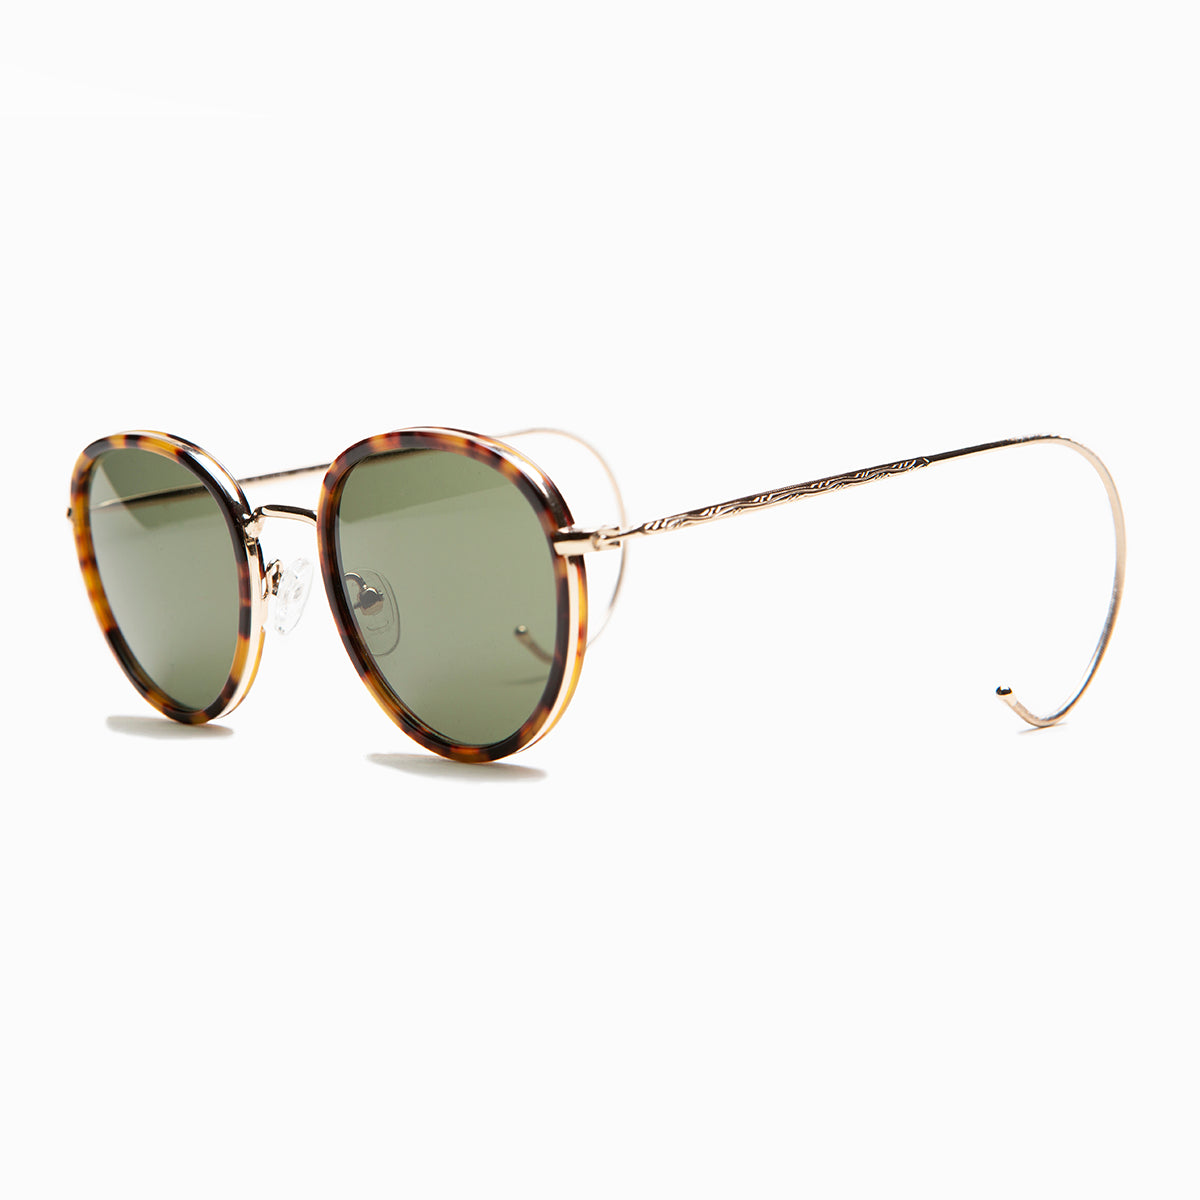 Preppy Sunglass with Cable Temples